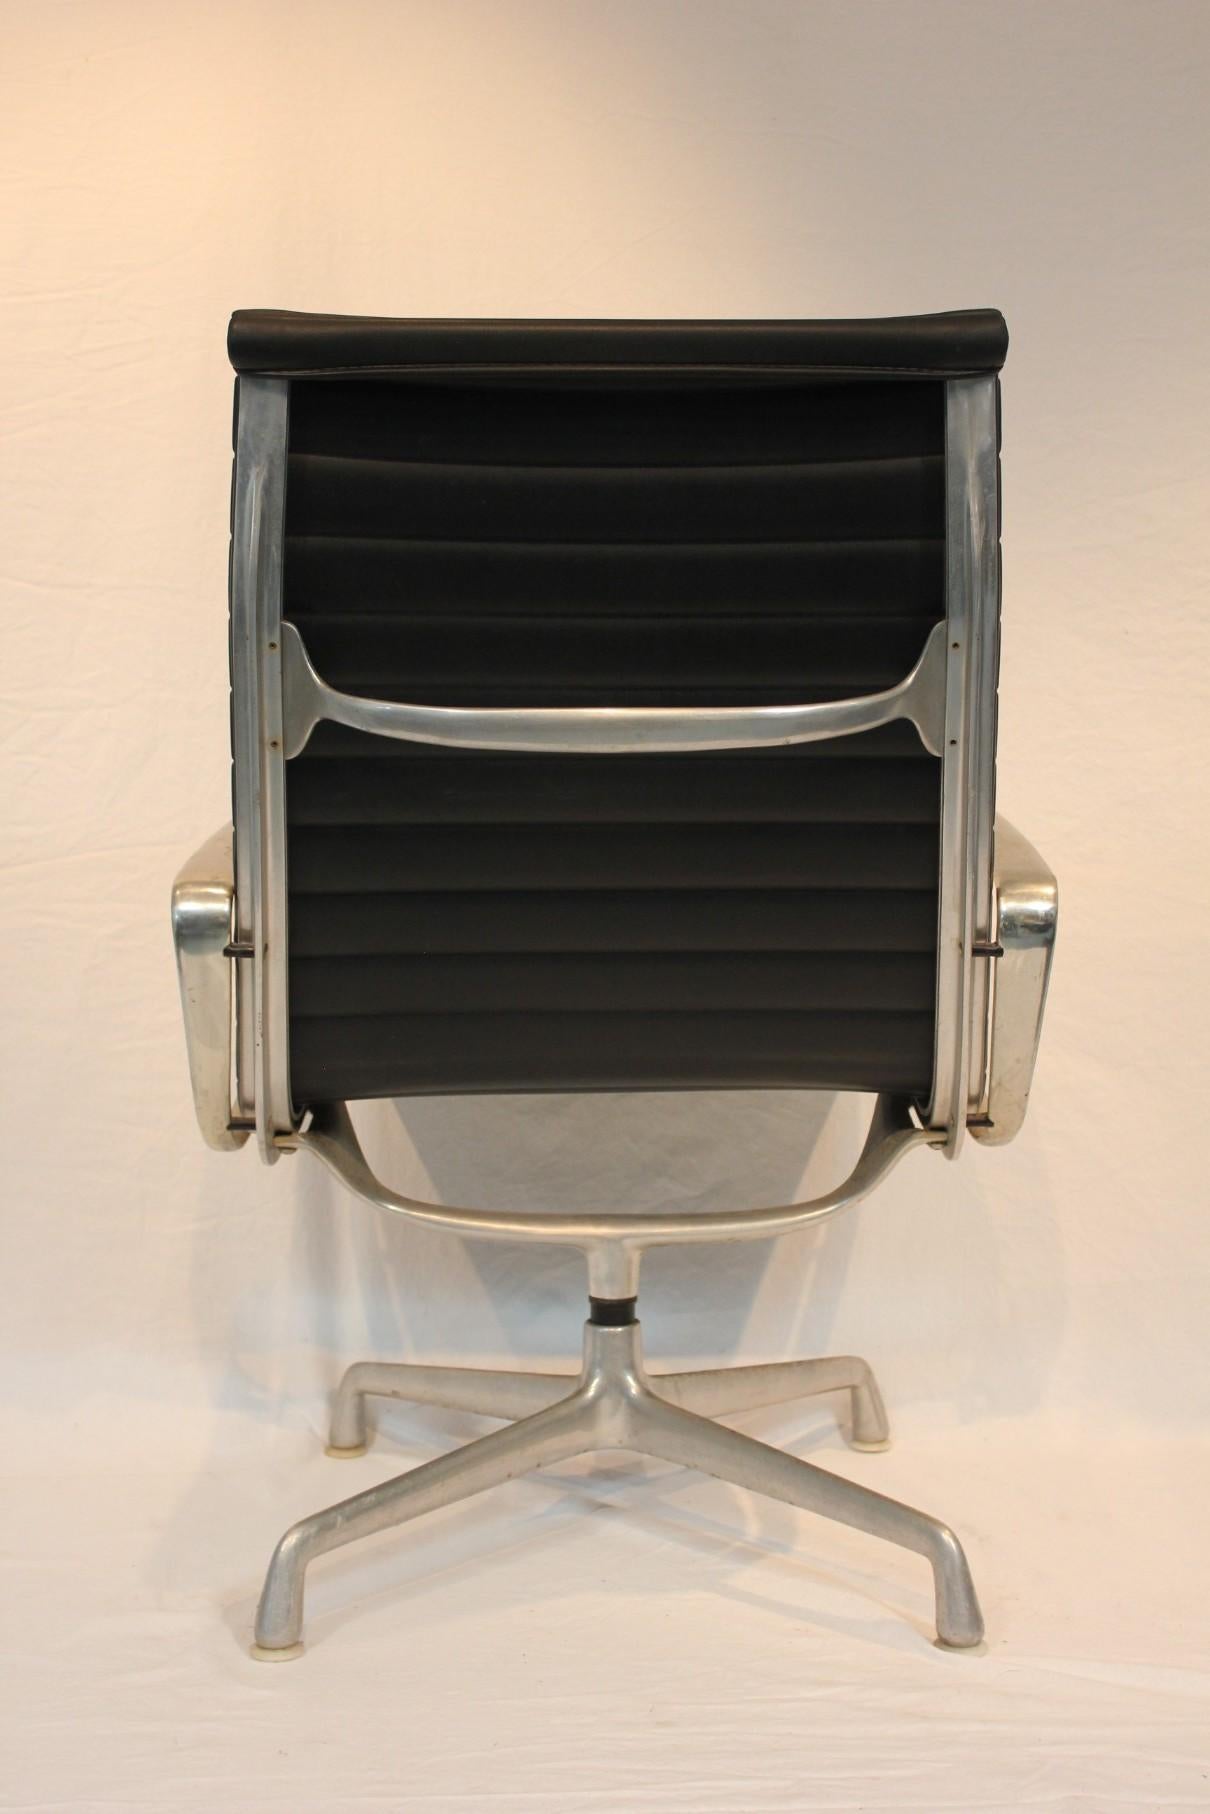 Herman Miller Eames Aluminum Lounge Chair Mid 20th Century Modern Circa 1970 For Sale 2